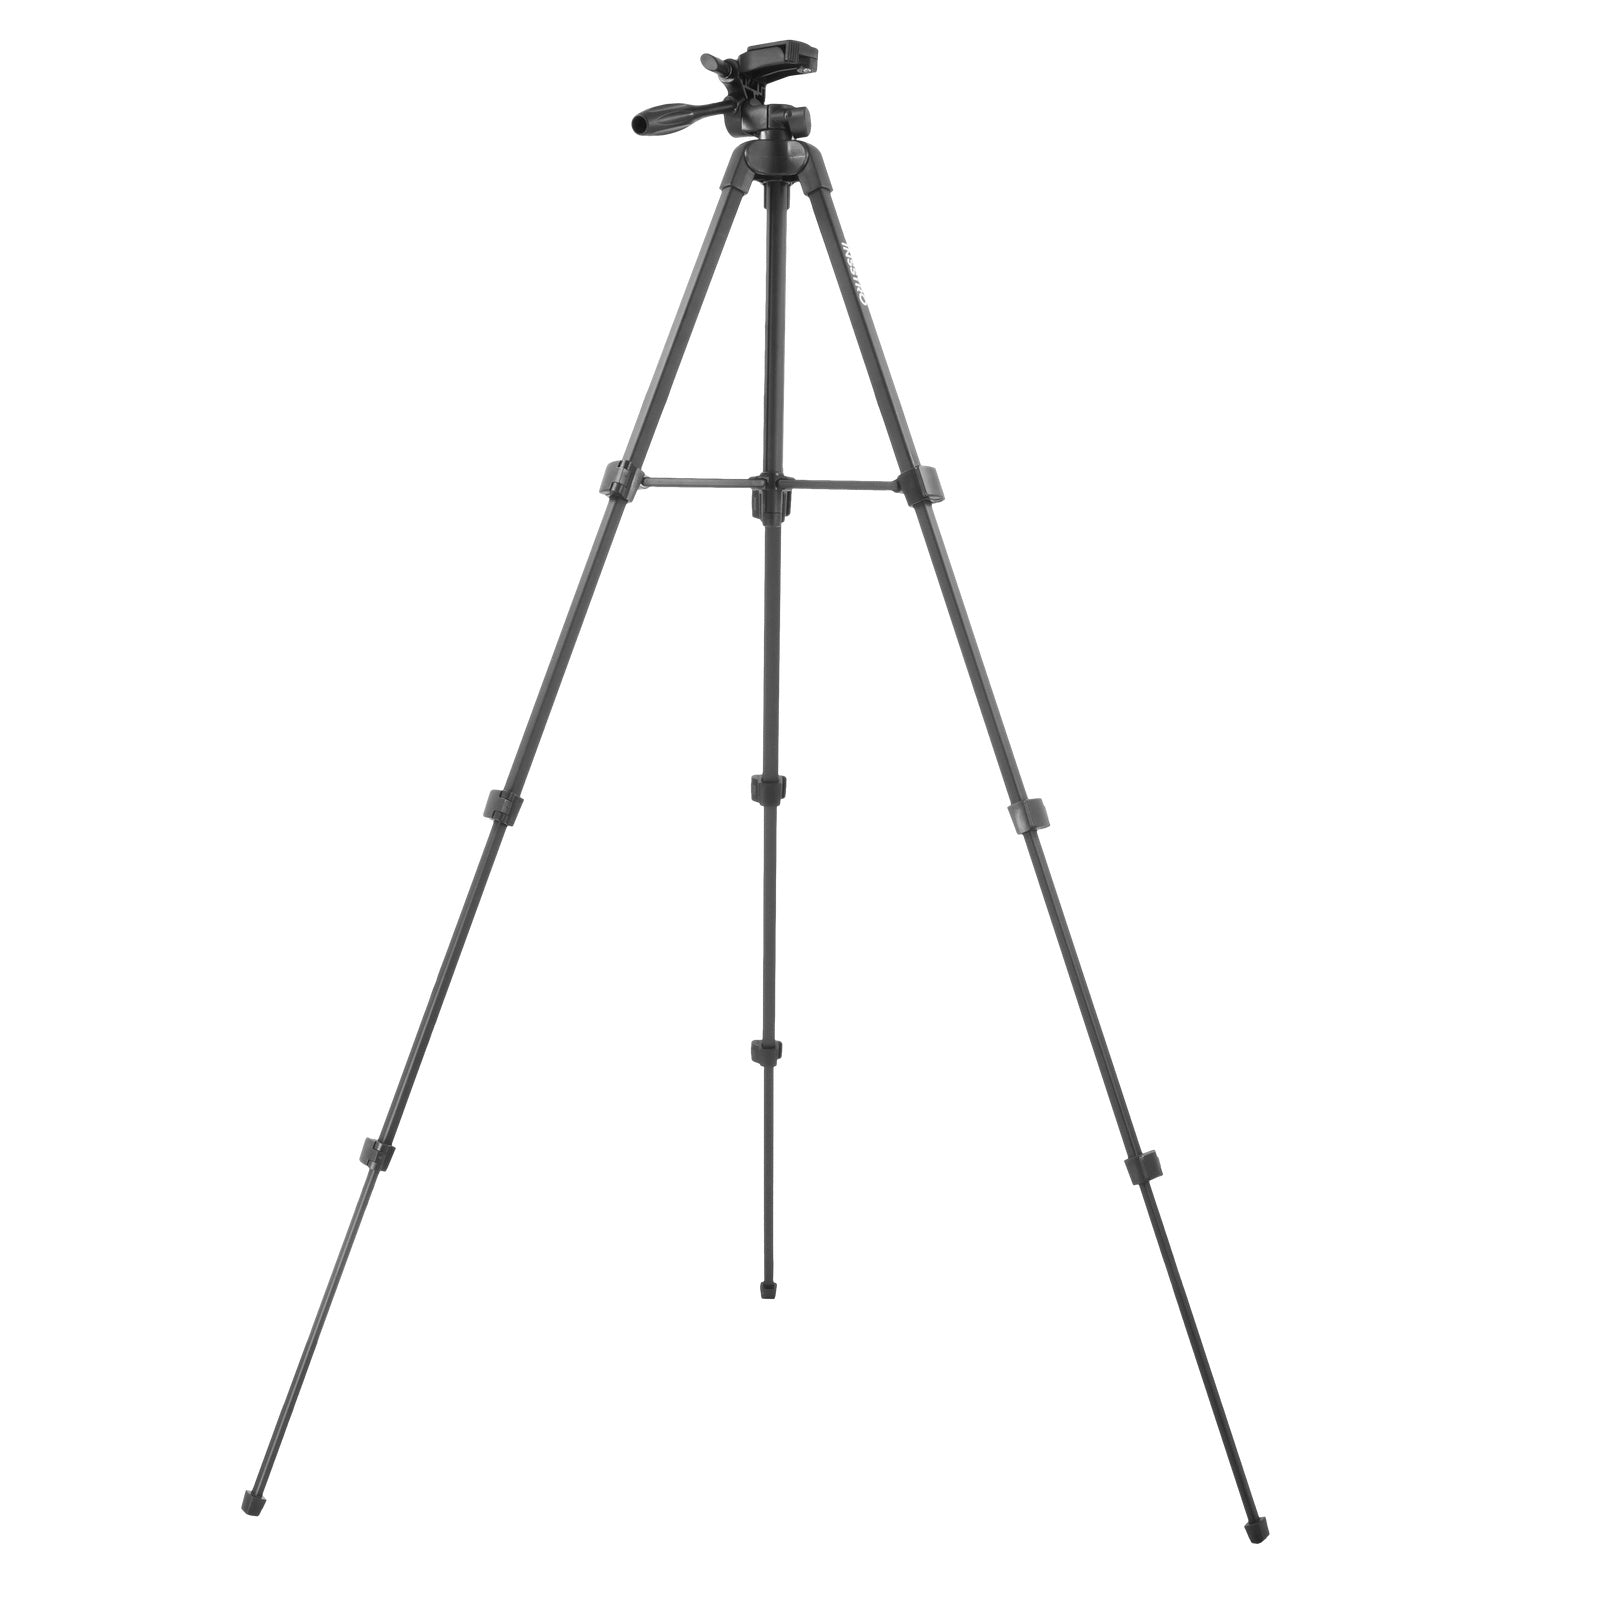 INSSRO Quick Release Camera Tripod Stand with Pan Head